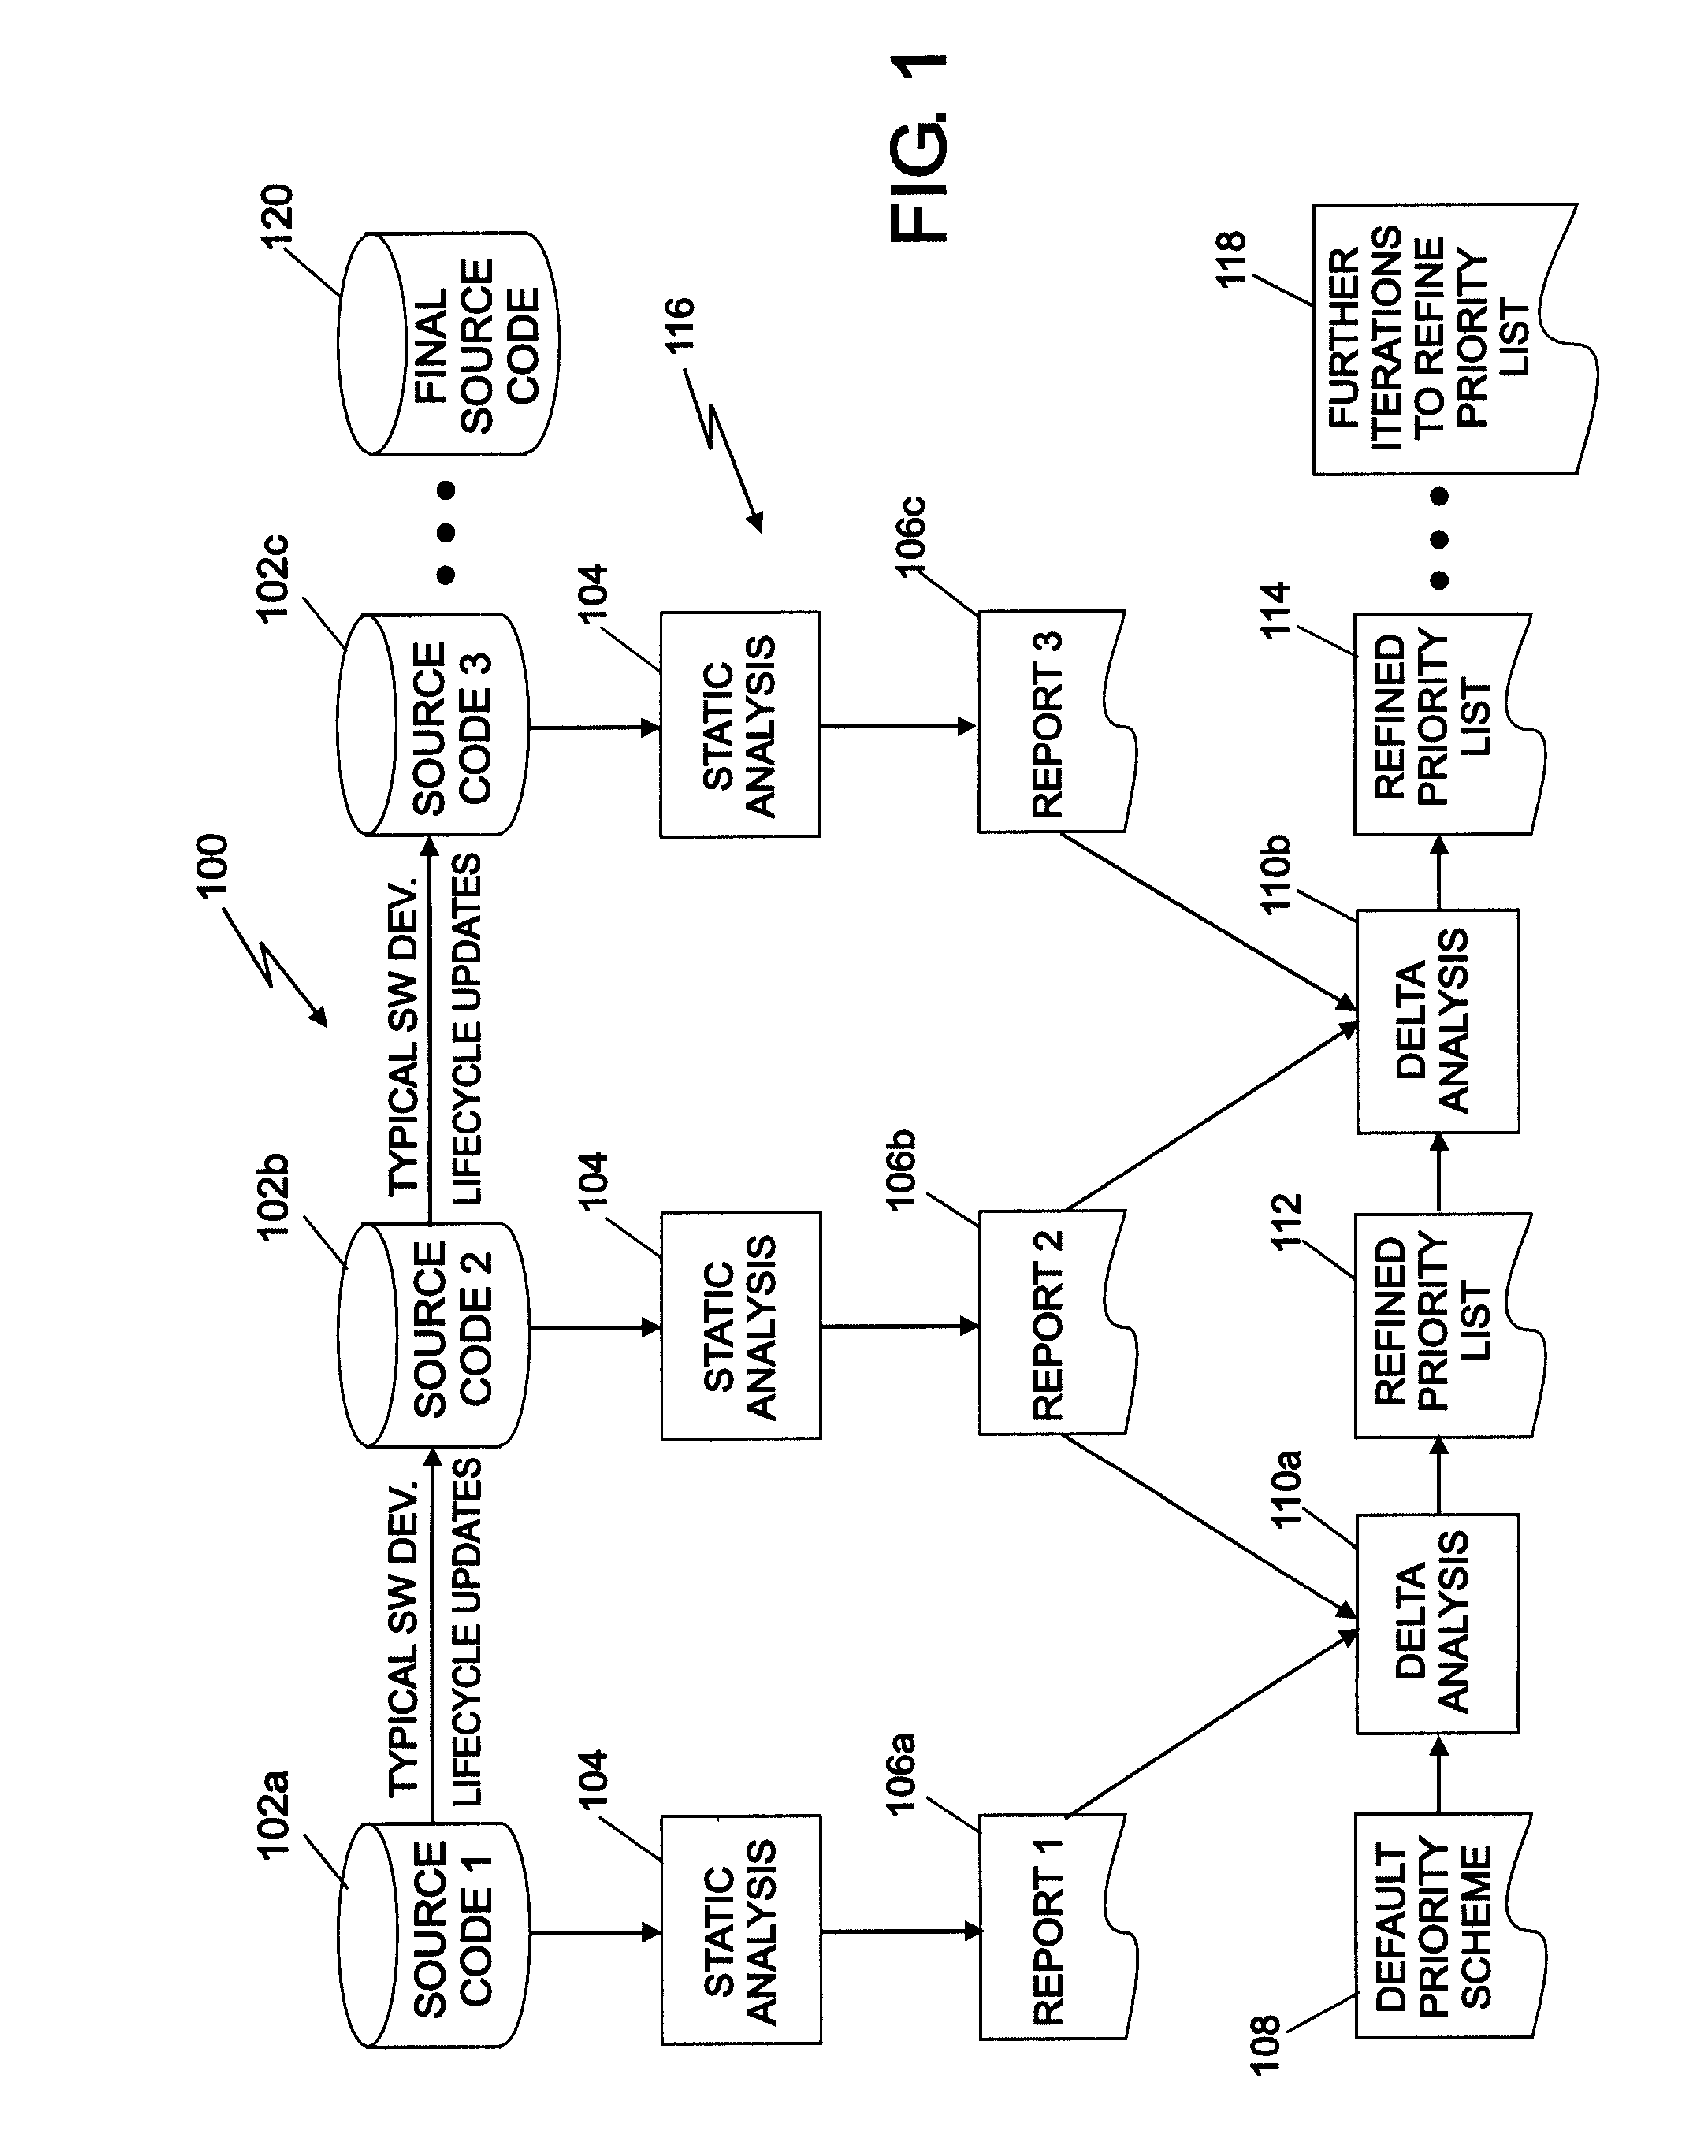 Method and system for autonomically prioritizing software defects